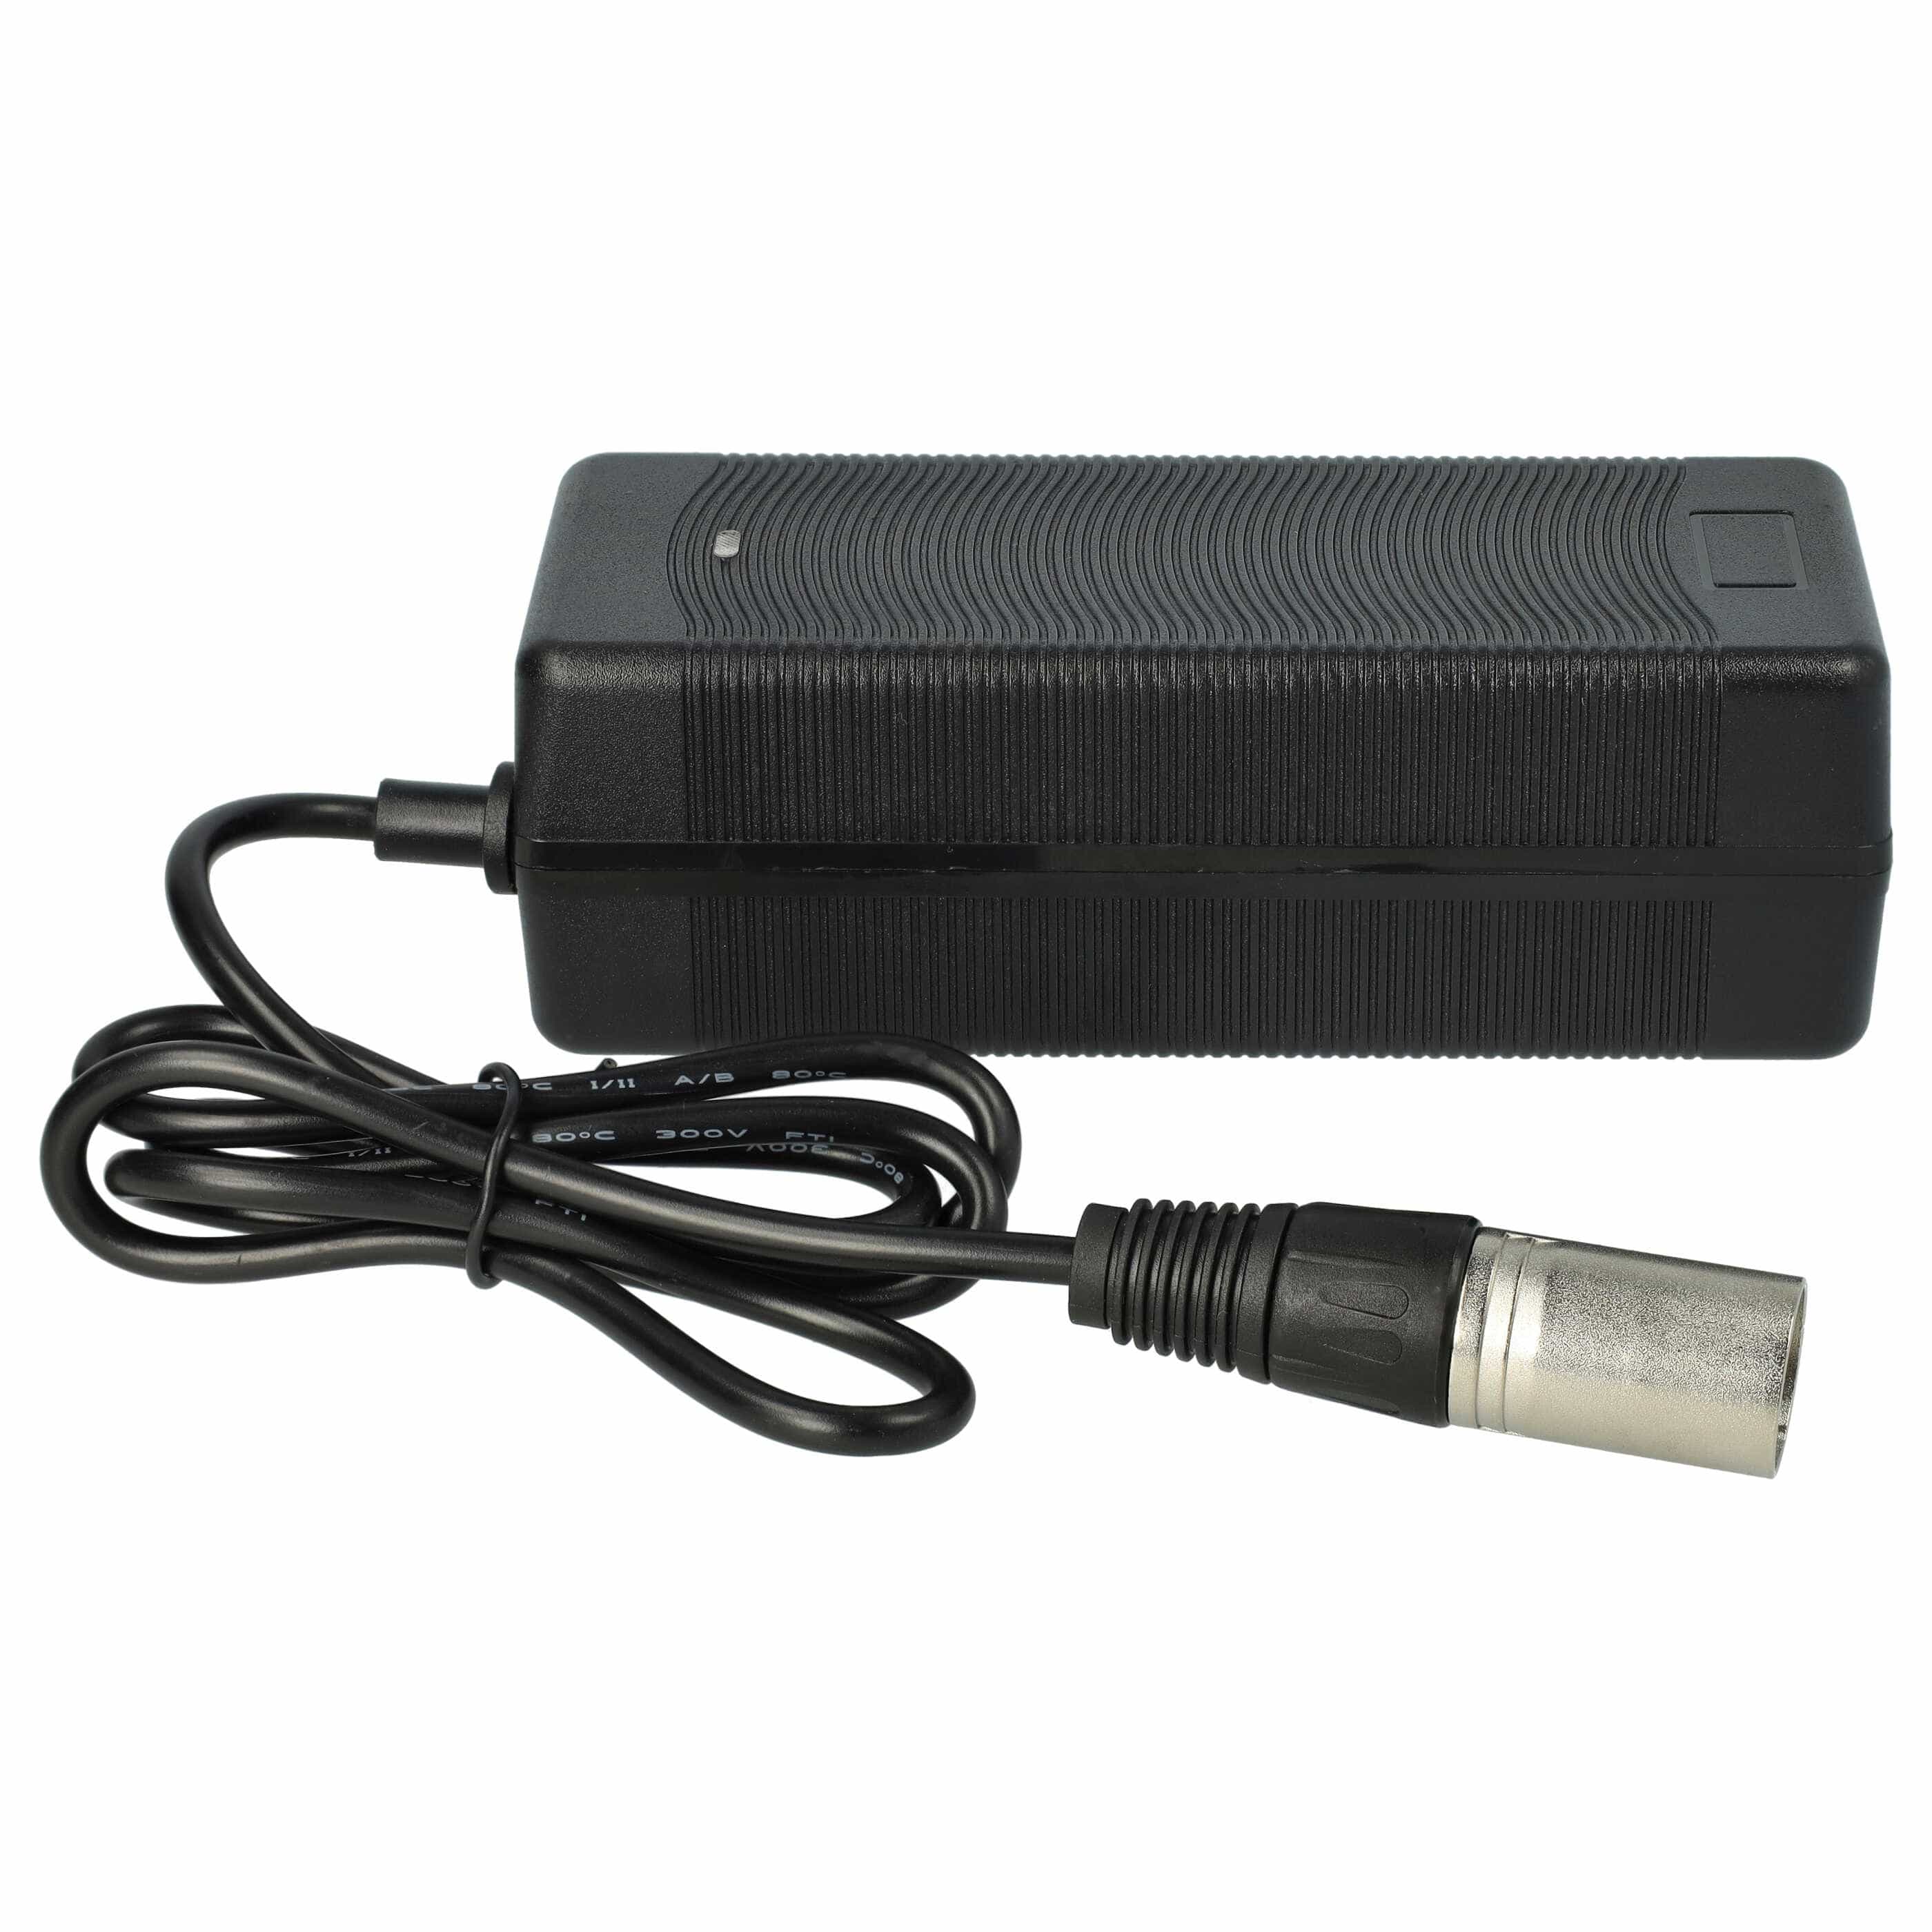 Charger suitable for Prophete Li-Ion E-Bike Battery etc. - For 36 V Batteries, With XLR Connector, 2.0 A